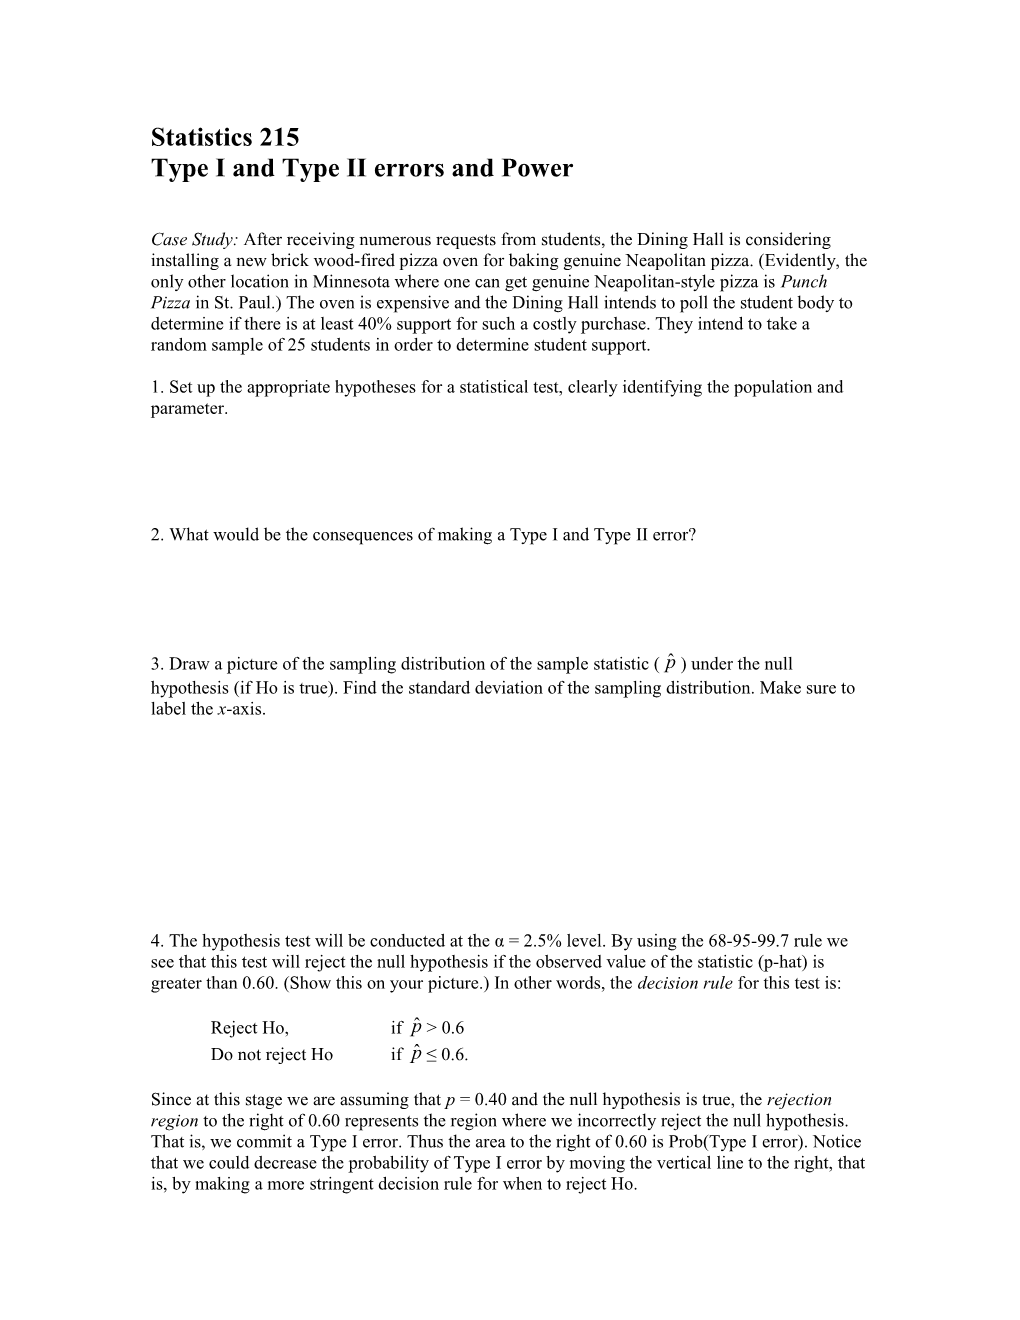 Type I and Type II Errors and Power